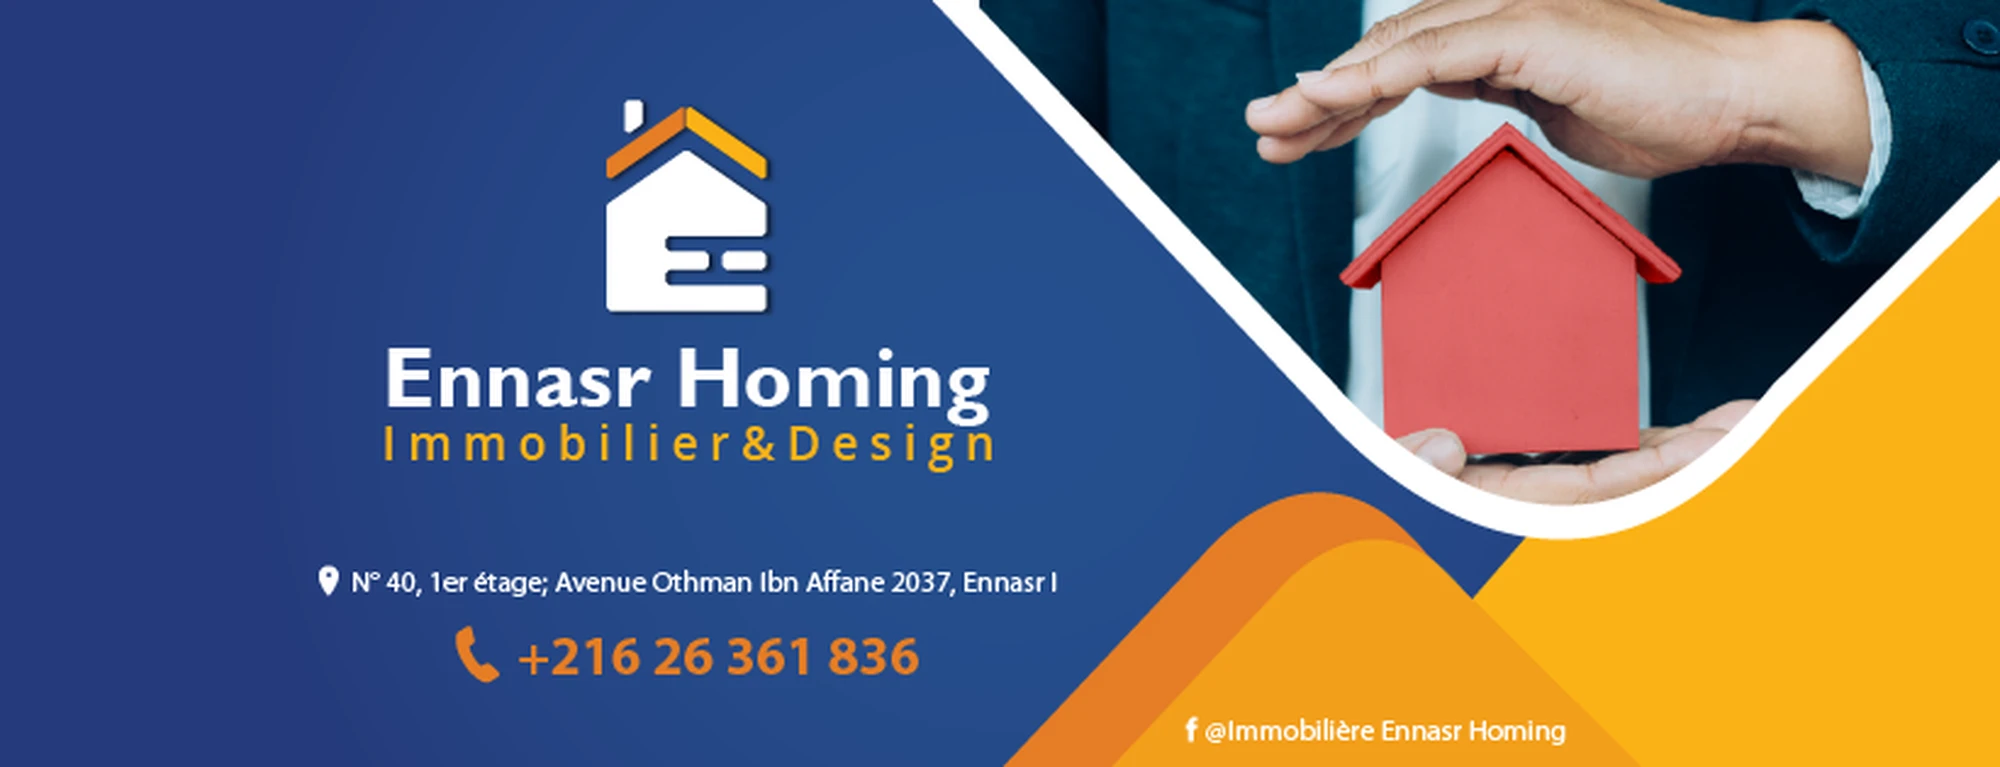 tayara shop cover of IMMOBILIERE ENNASR HOMING